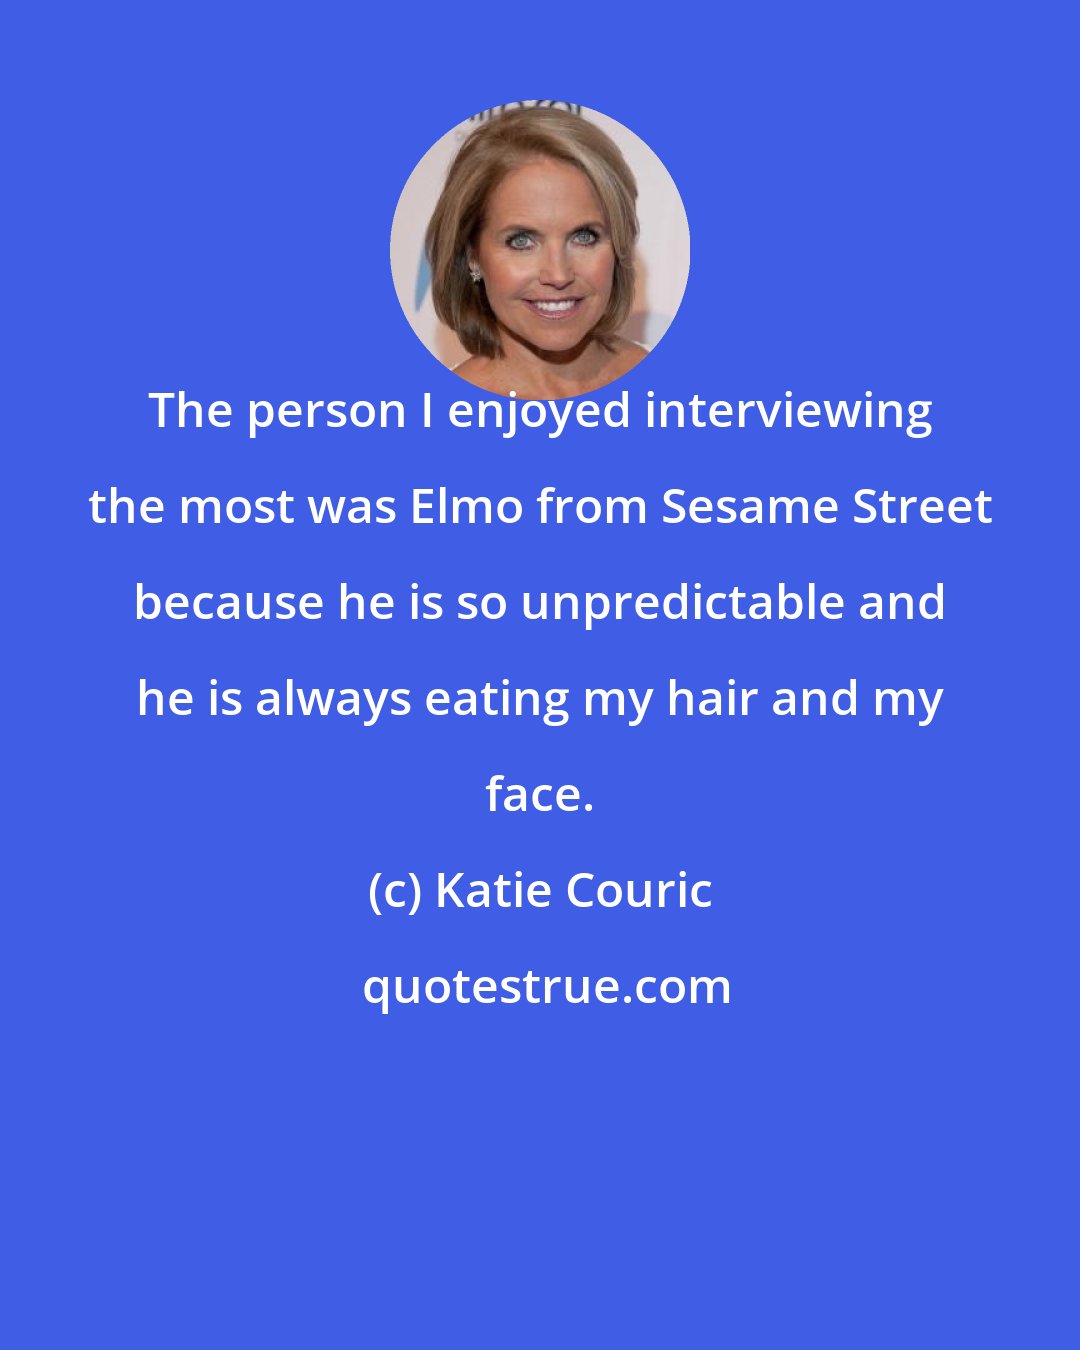 Katie Couric: The person I enjoyed interviewing the most was Elmo from Sesame Street because he is so unpredictable and he is always eating my hair and my face.